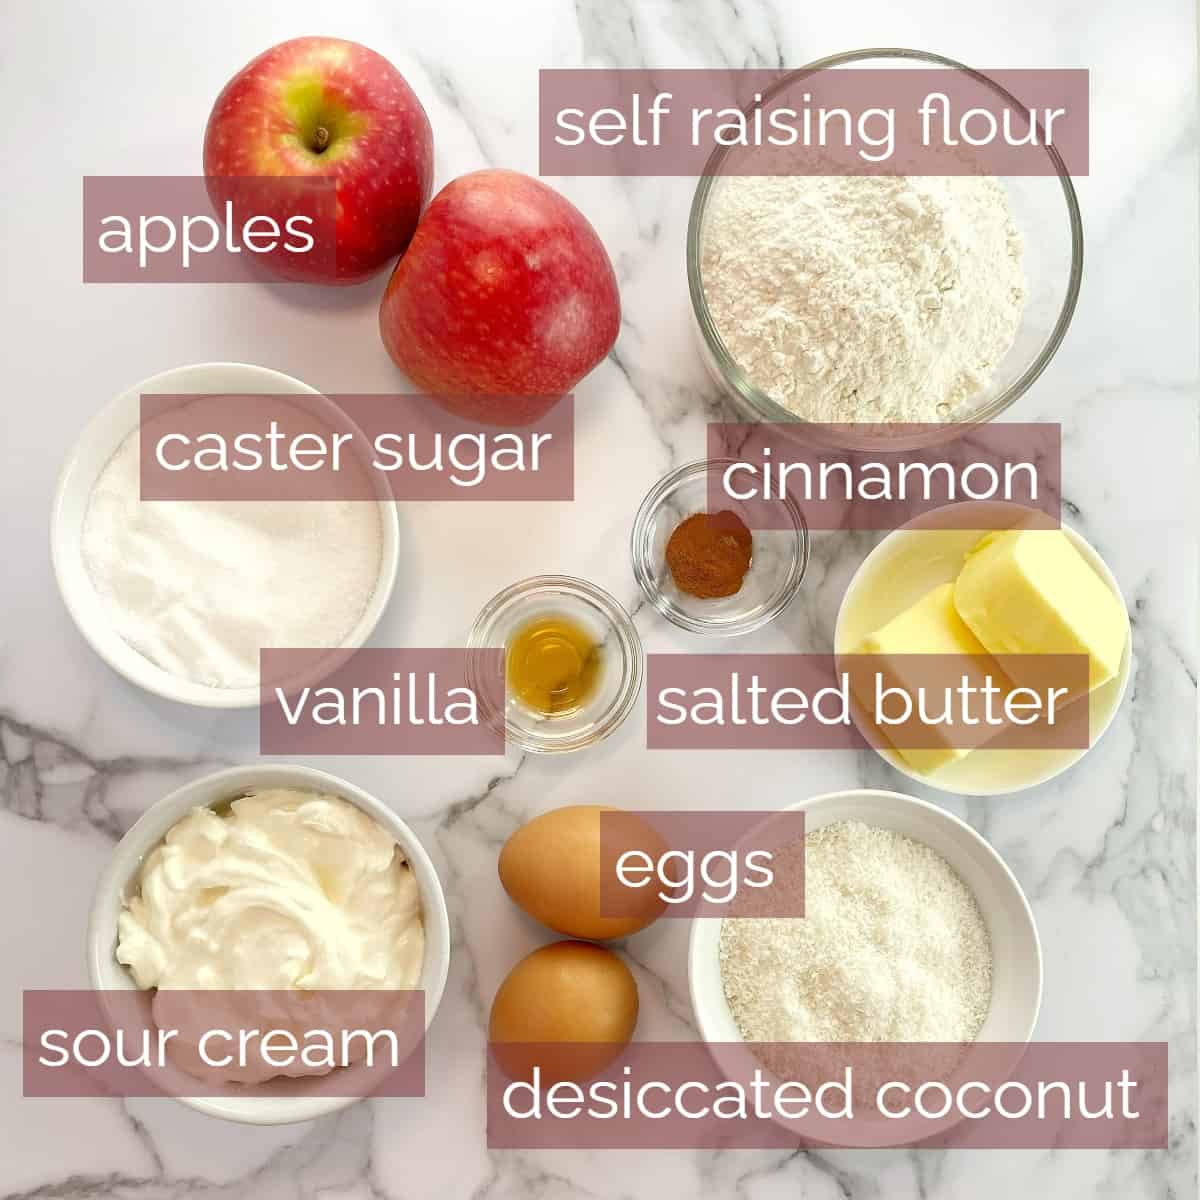 images showing ingredients needed to make this recipe with labels